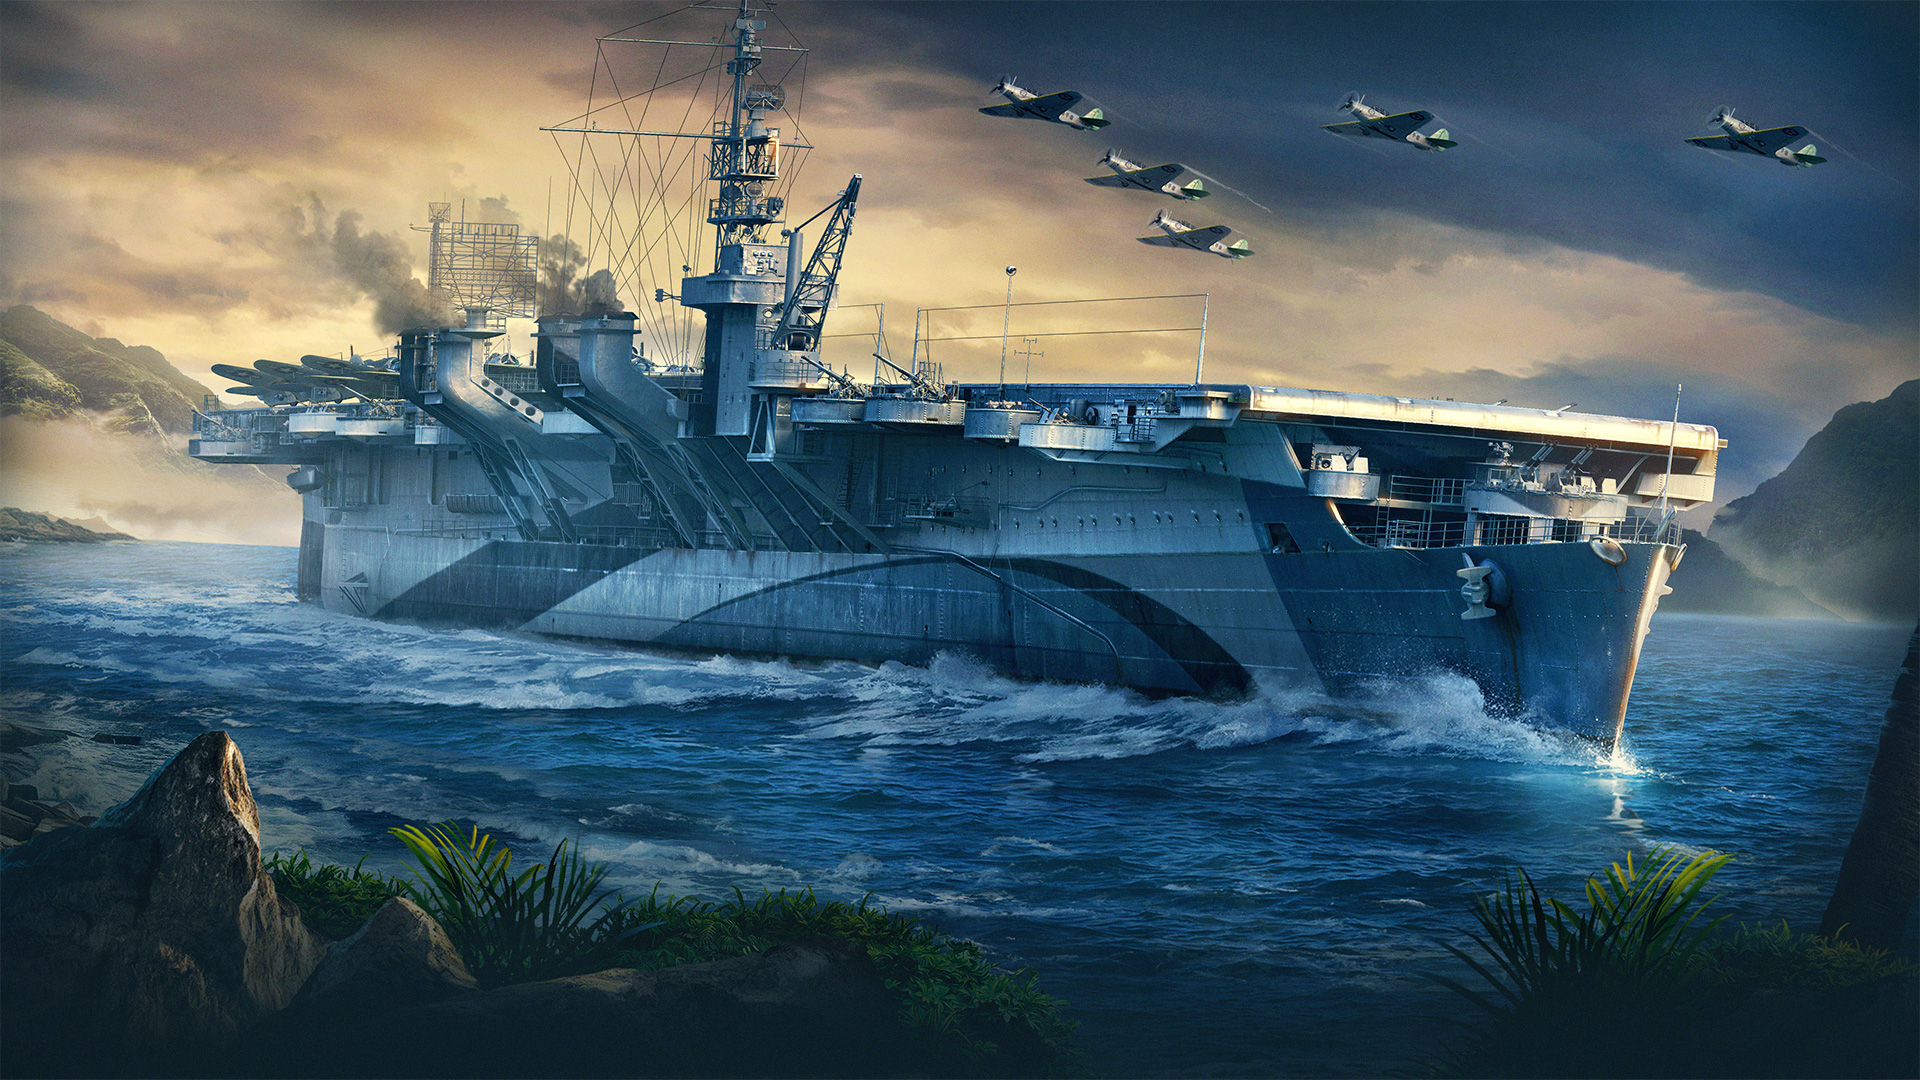 World of Warships: Legends Is Now Officially Live